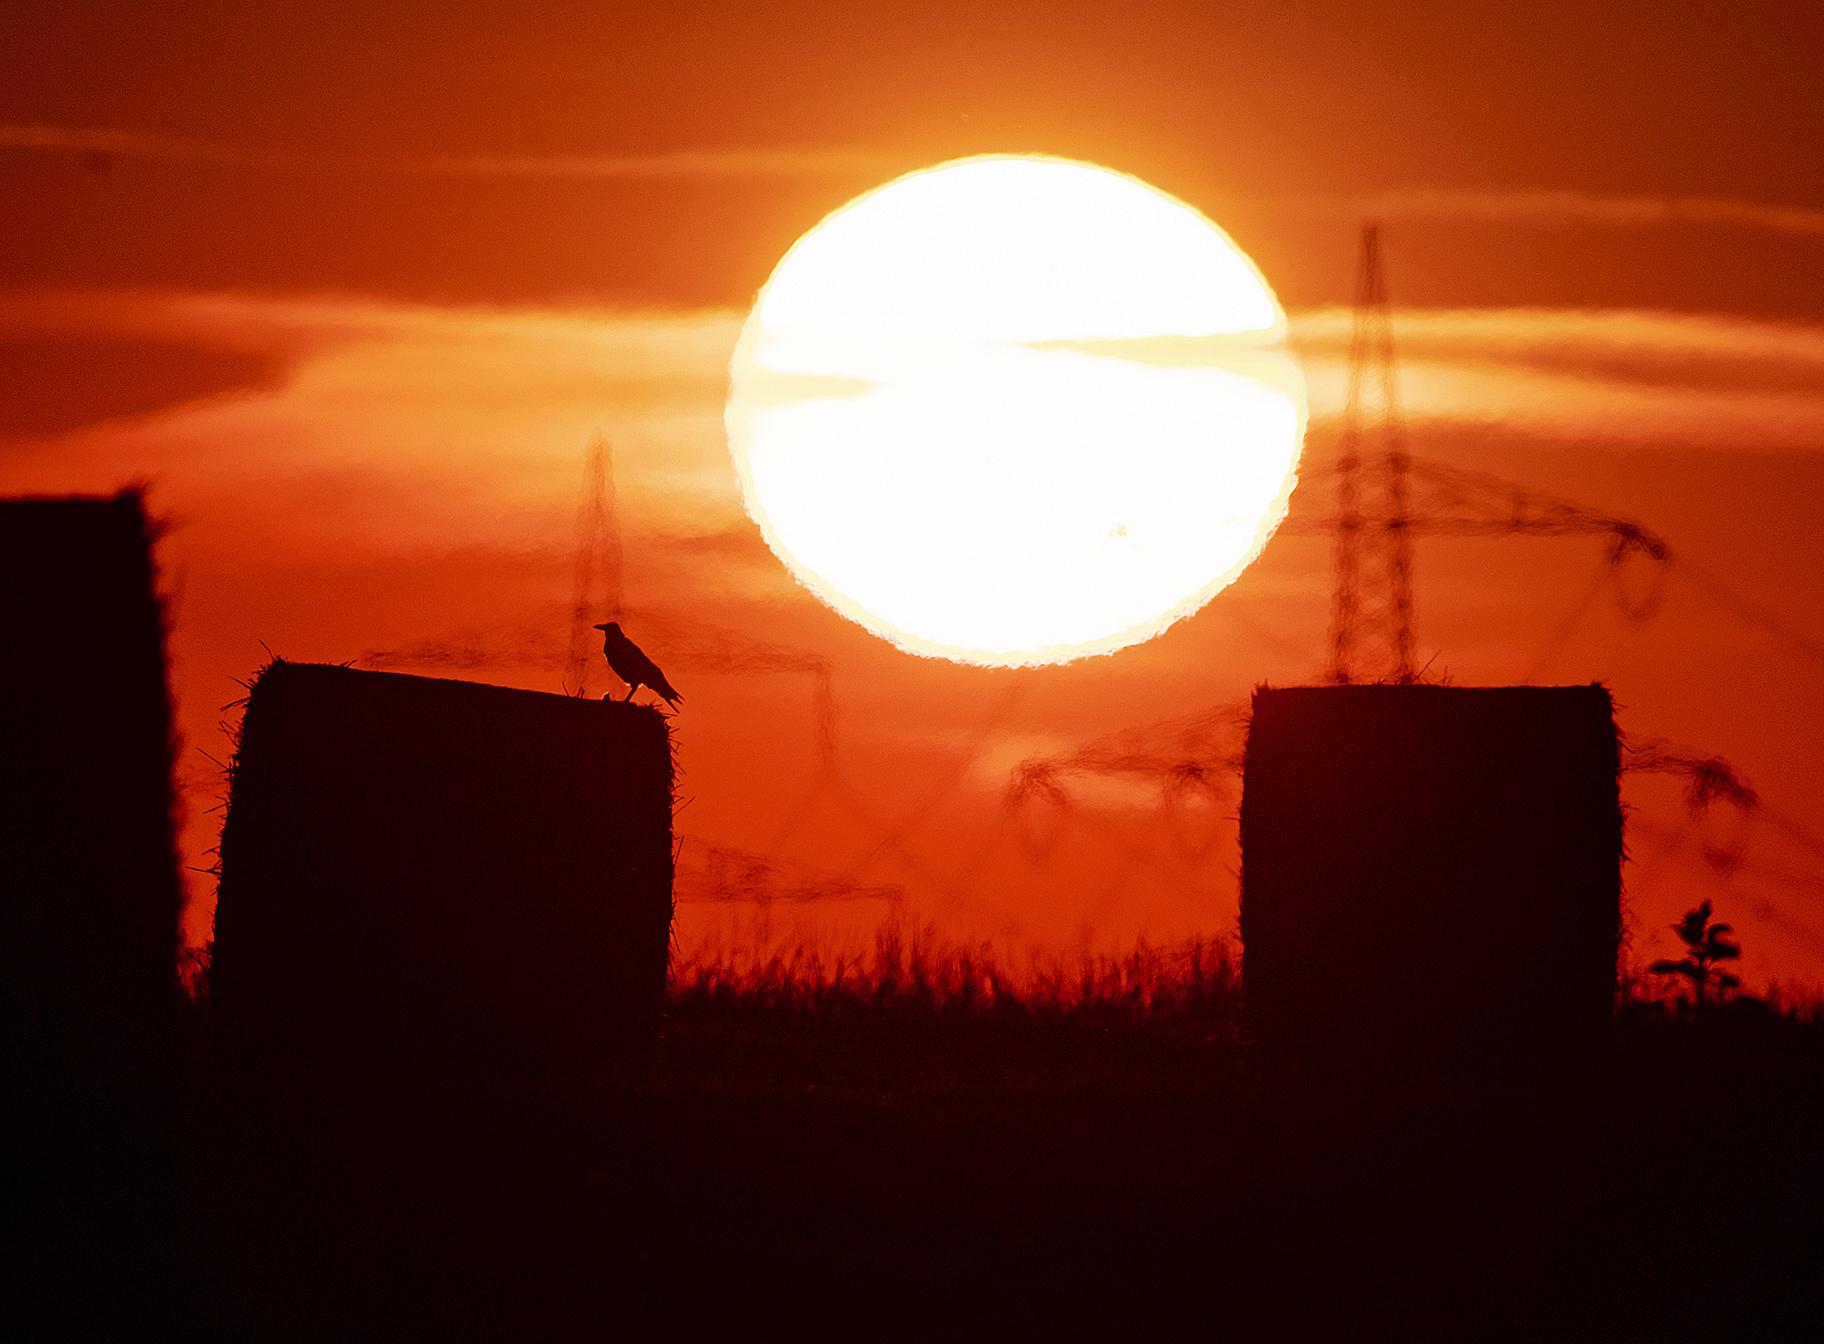 In this file photo dated Thursday, July 25, 2019, a bird sits on a straw bale on a field in Frankfurt, Germany, as the sun rises during an ongoing heatwave in Europe. (AP Photo / Michael Probst, FILE)